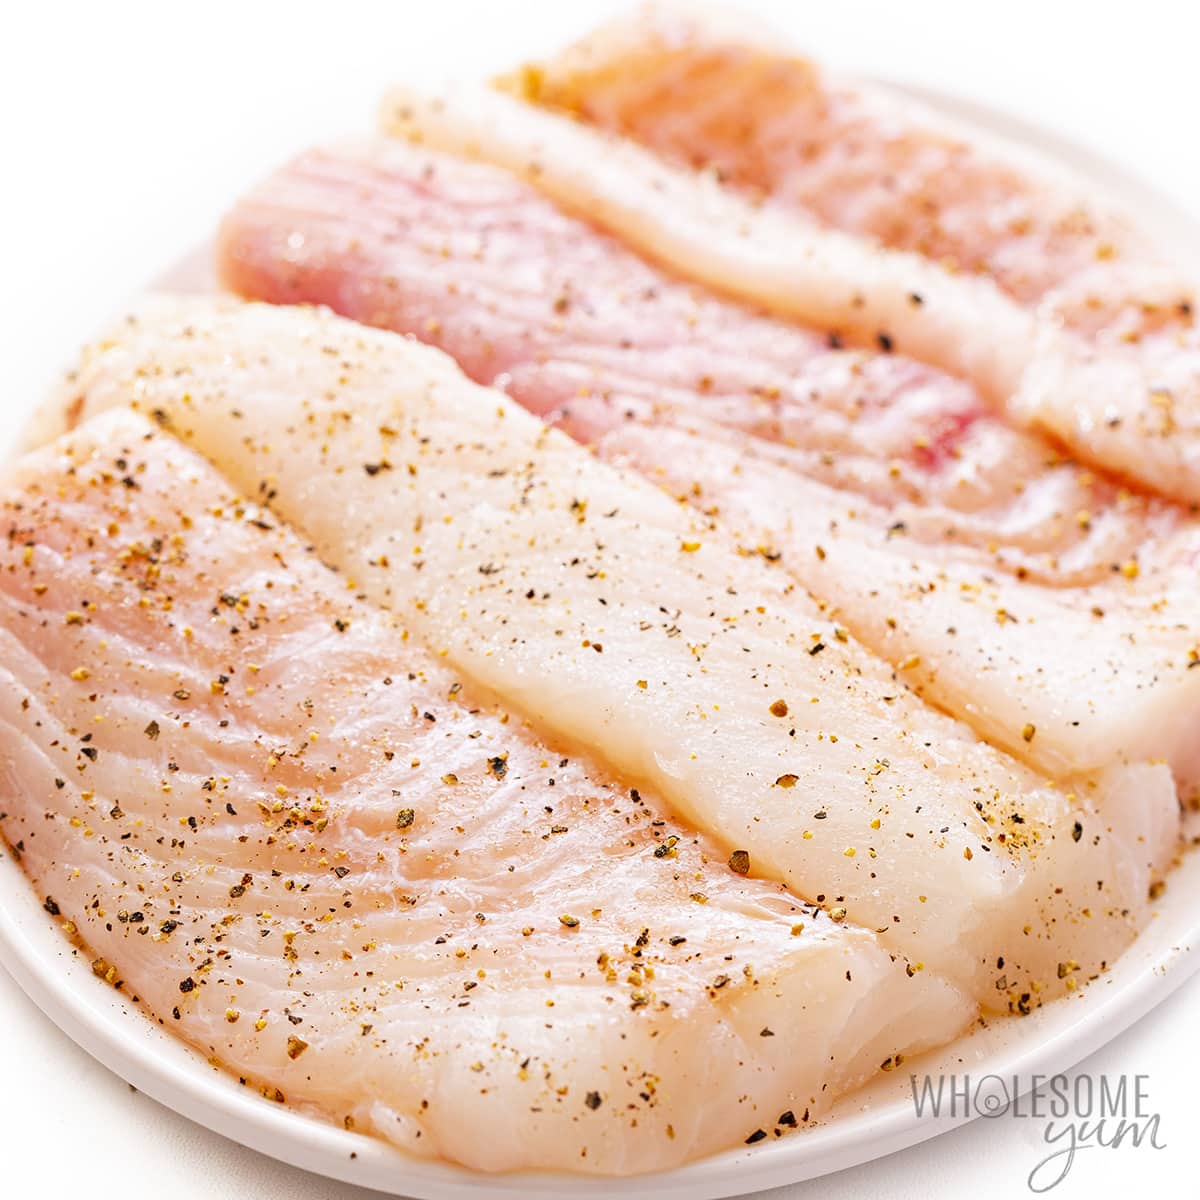 Fish seasoned with salt and pepper.